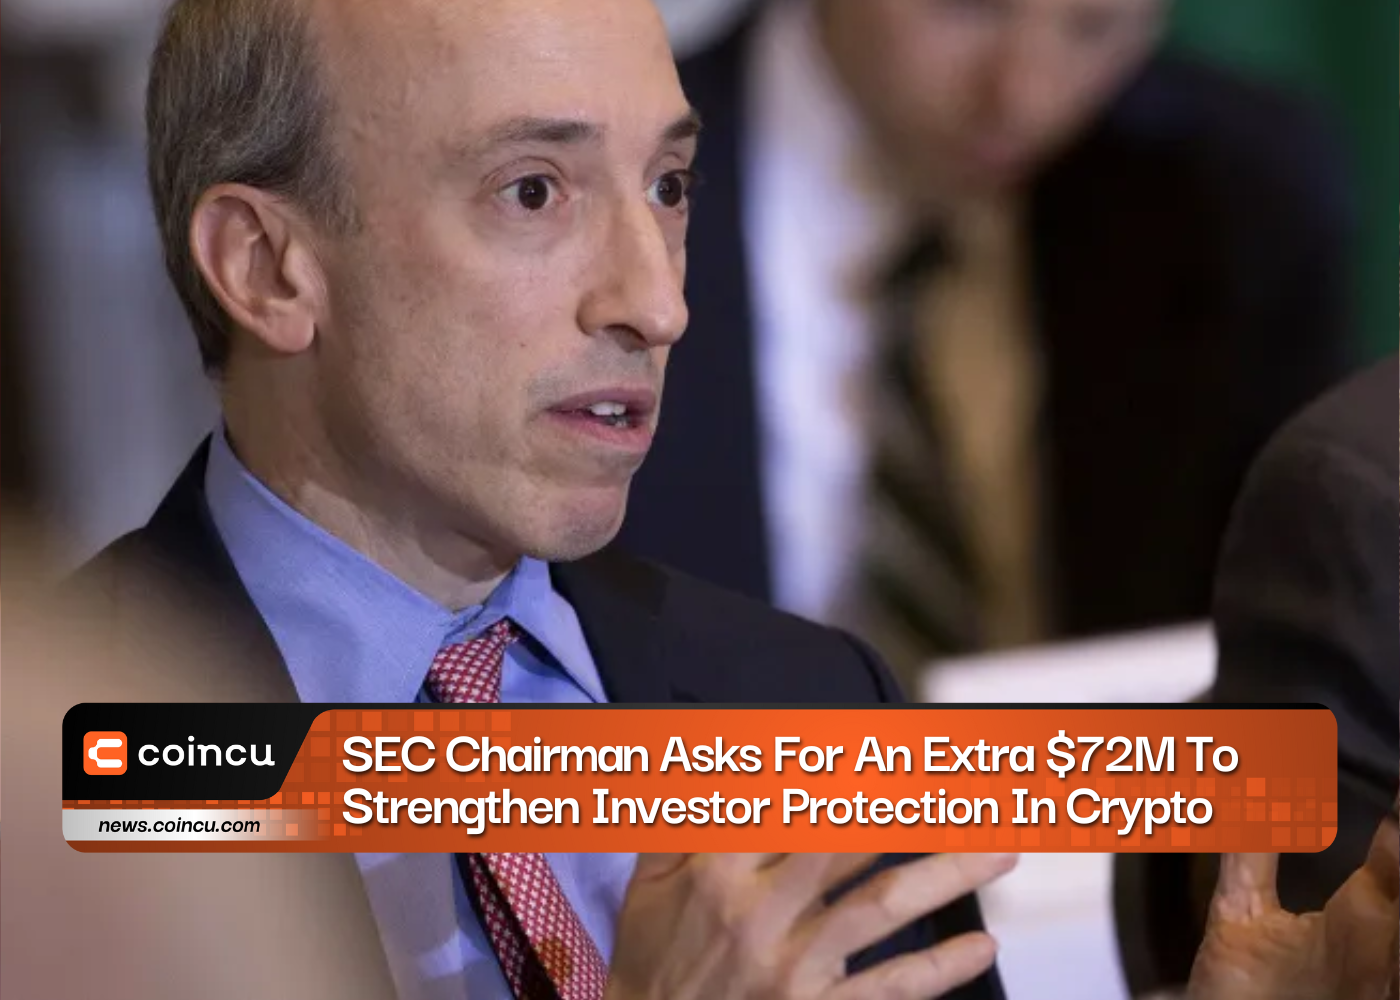 SEC Chairman Asks For An Extra $72M To Strengthen Investor Protection In Crypto